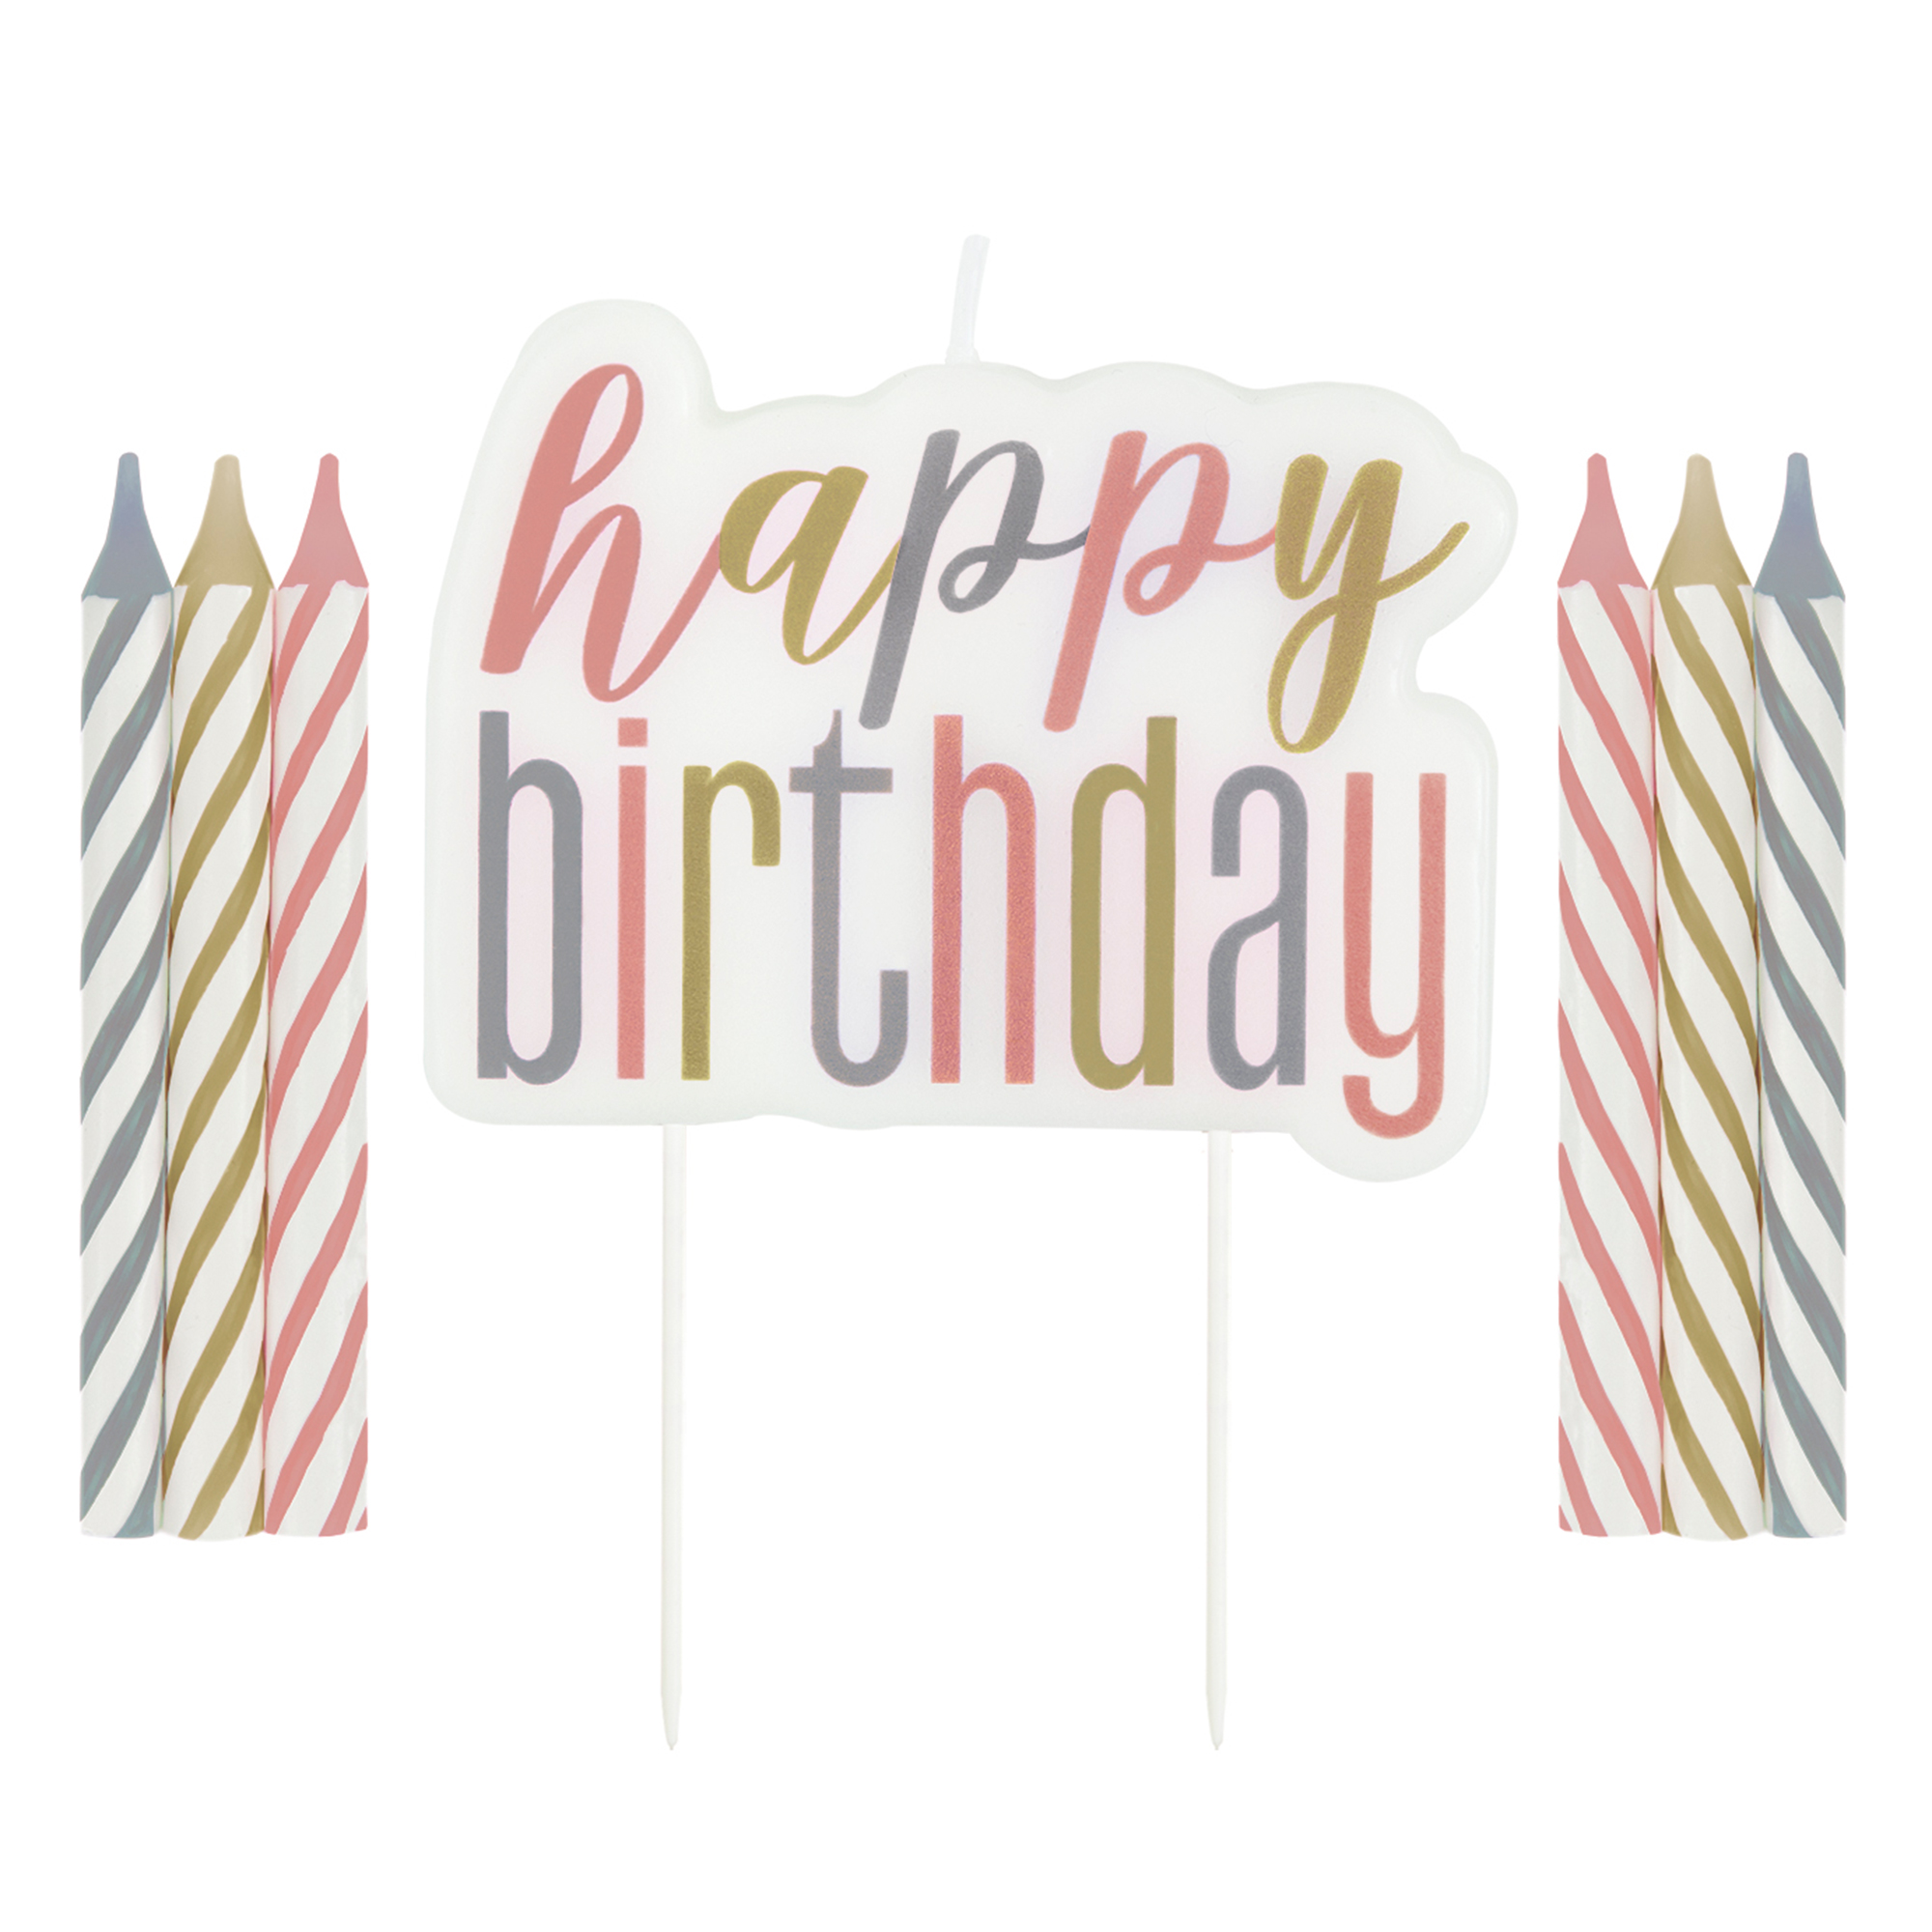 Rose Gold, Gold & Silver Happy Birthday"" Candles - Pack of 13